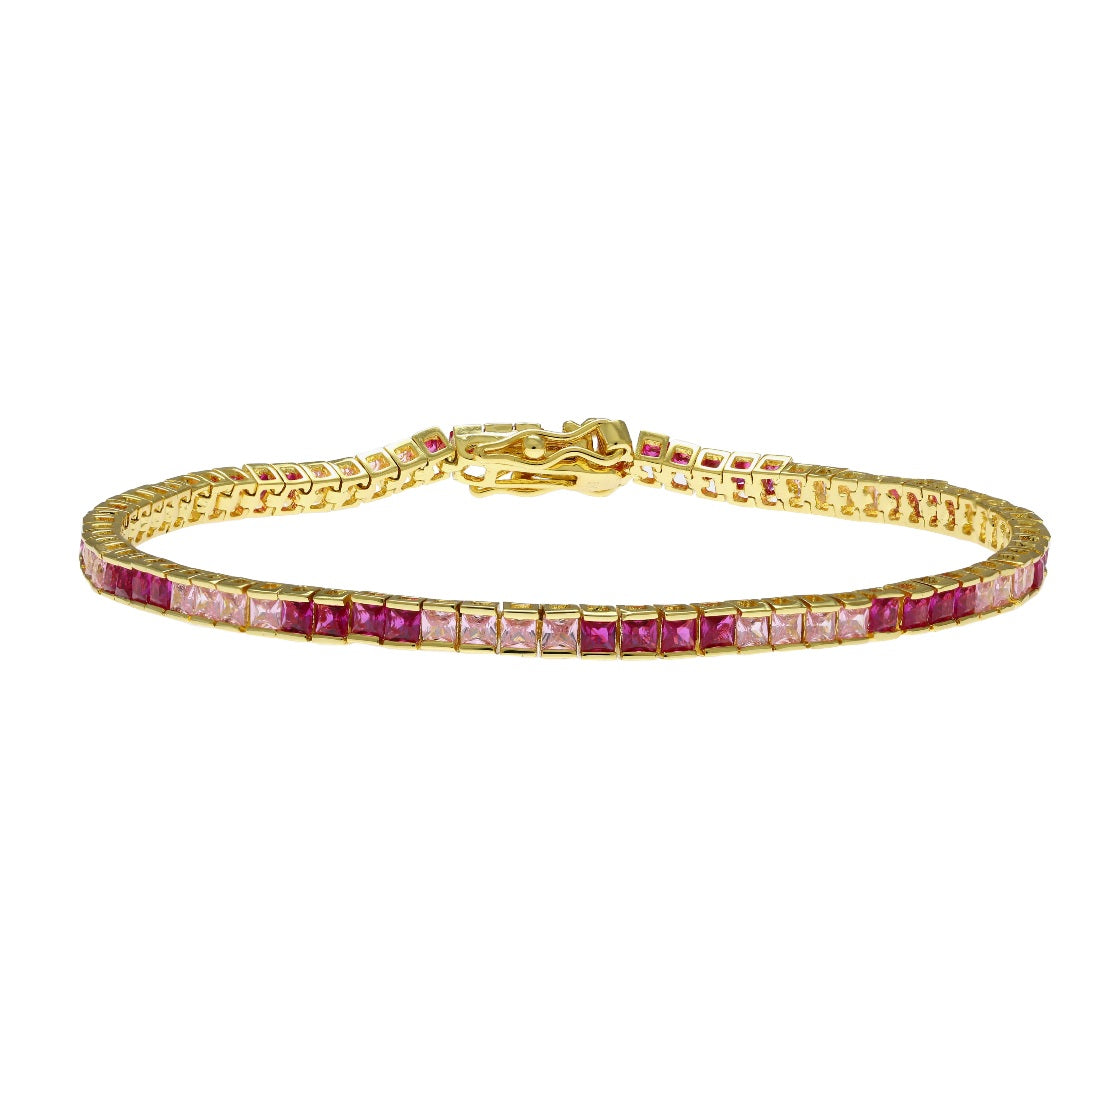 The Chic Pink Channel Setting Tennis Bracelet